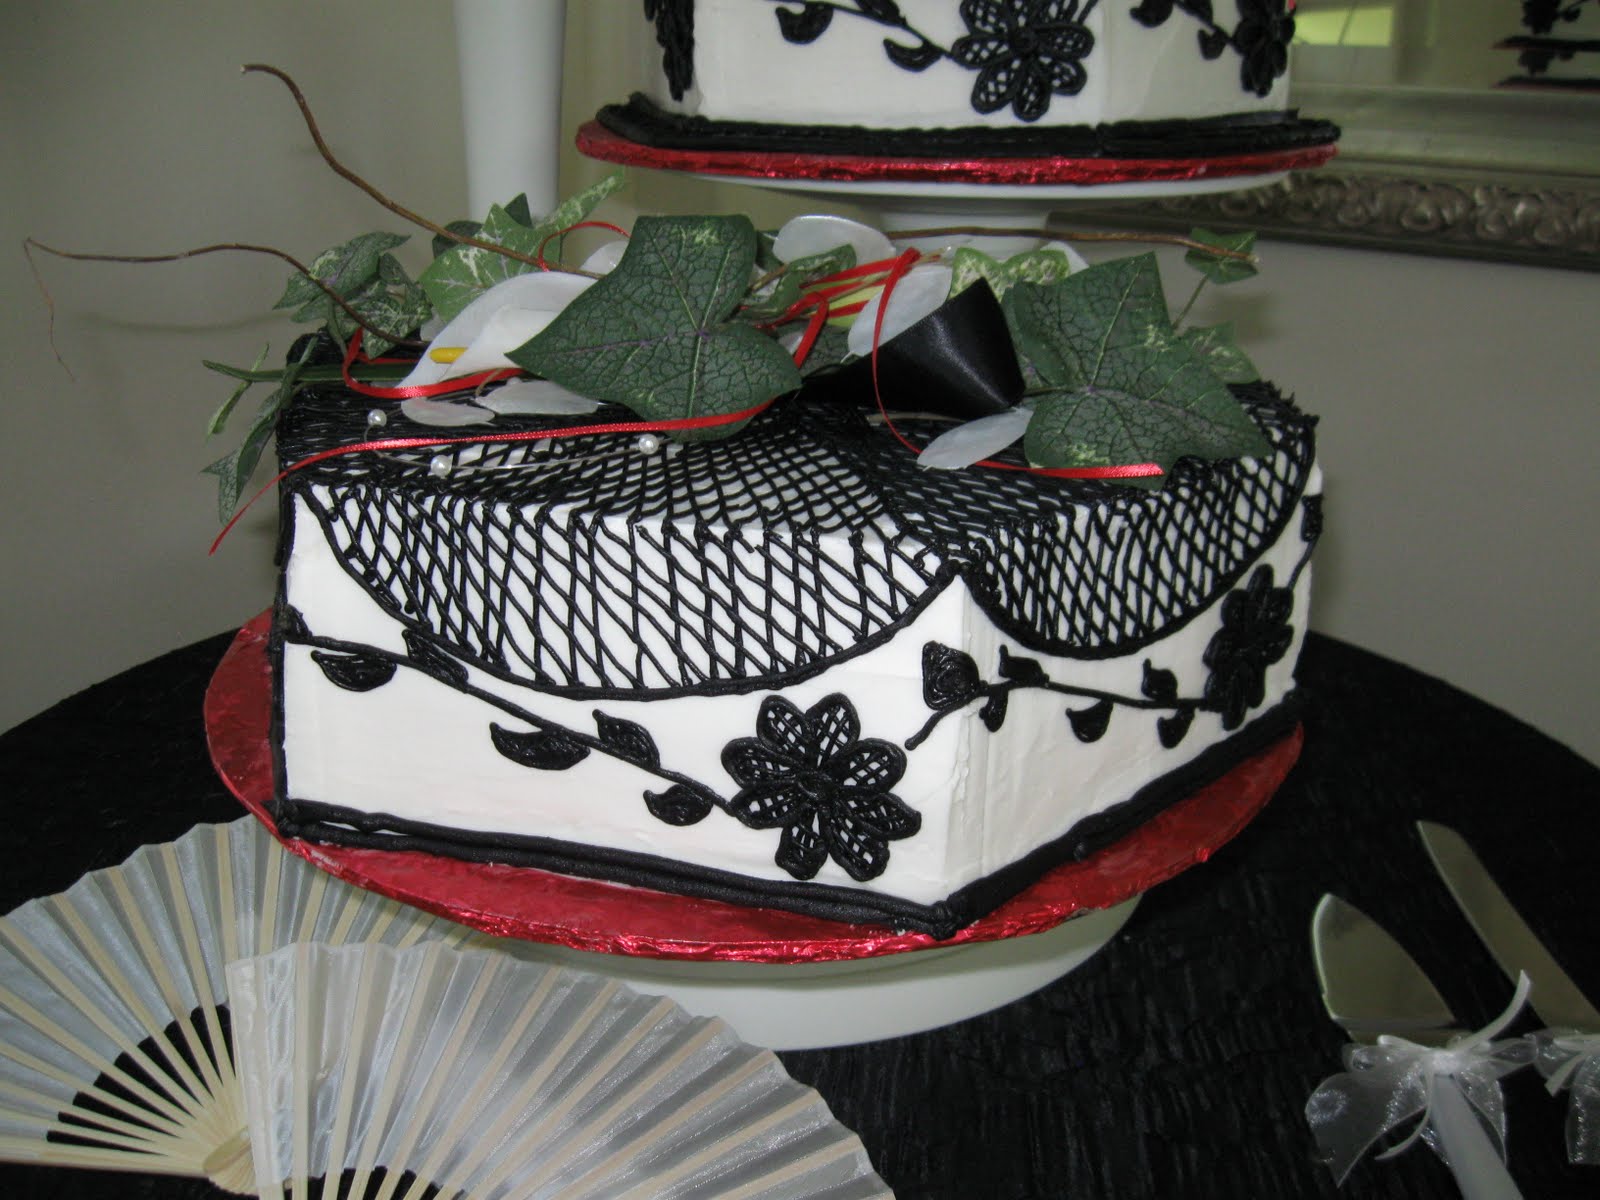 Black, white and red wedding